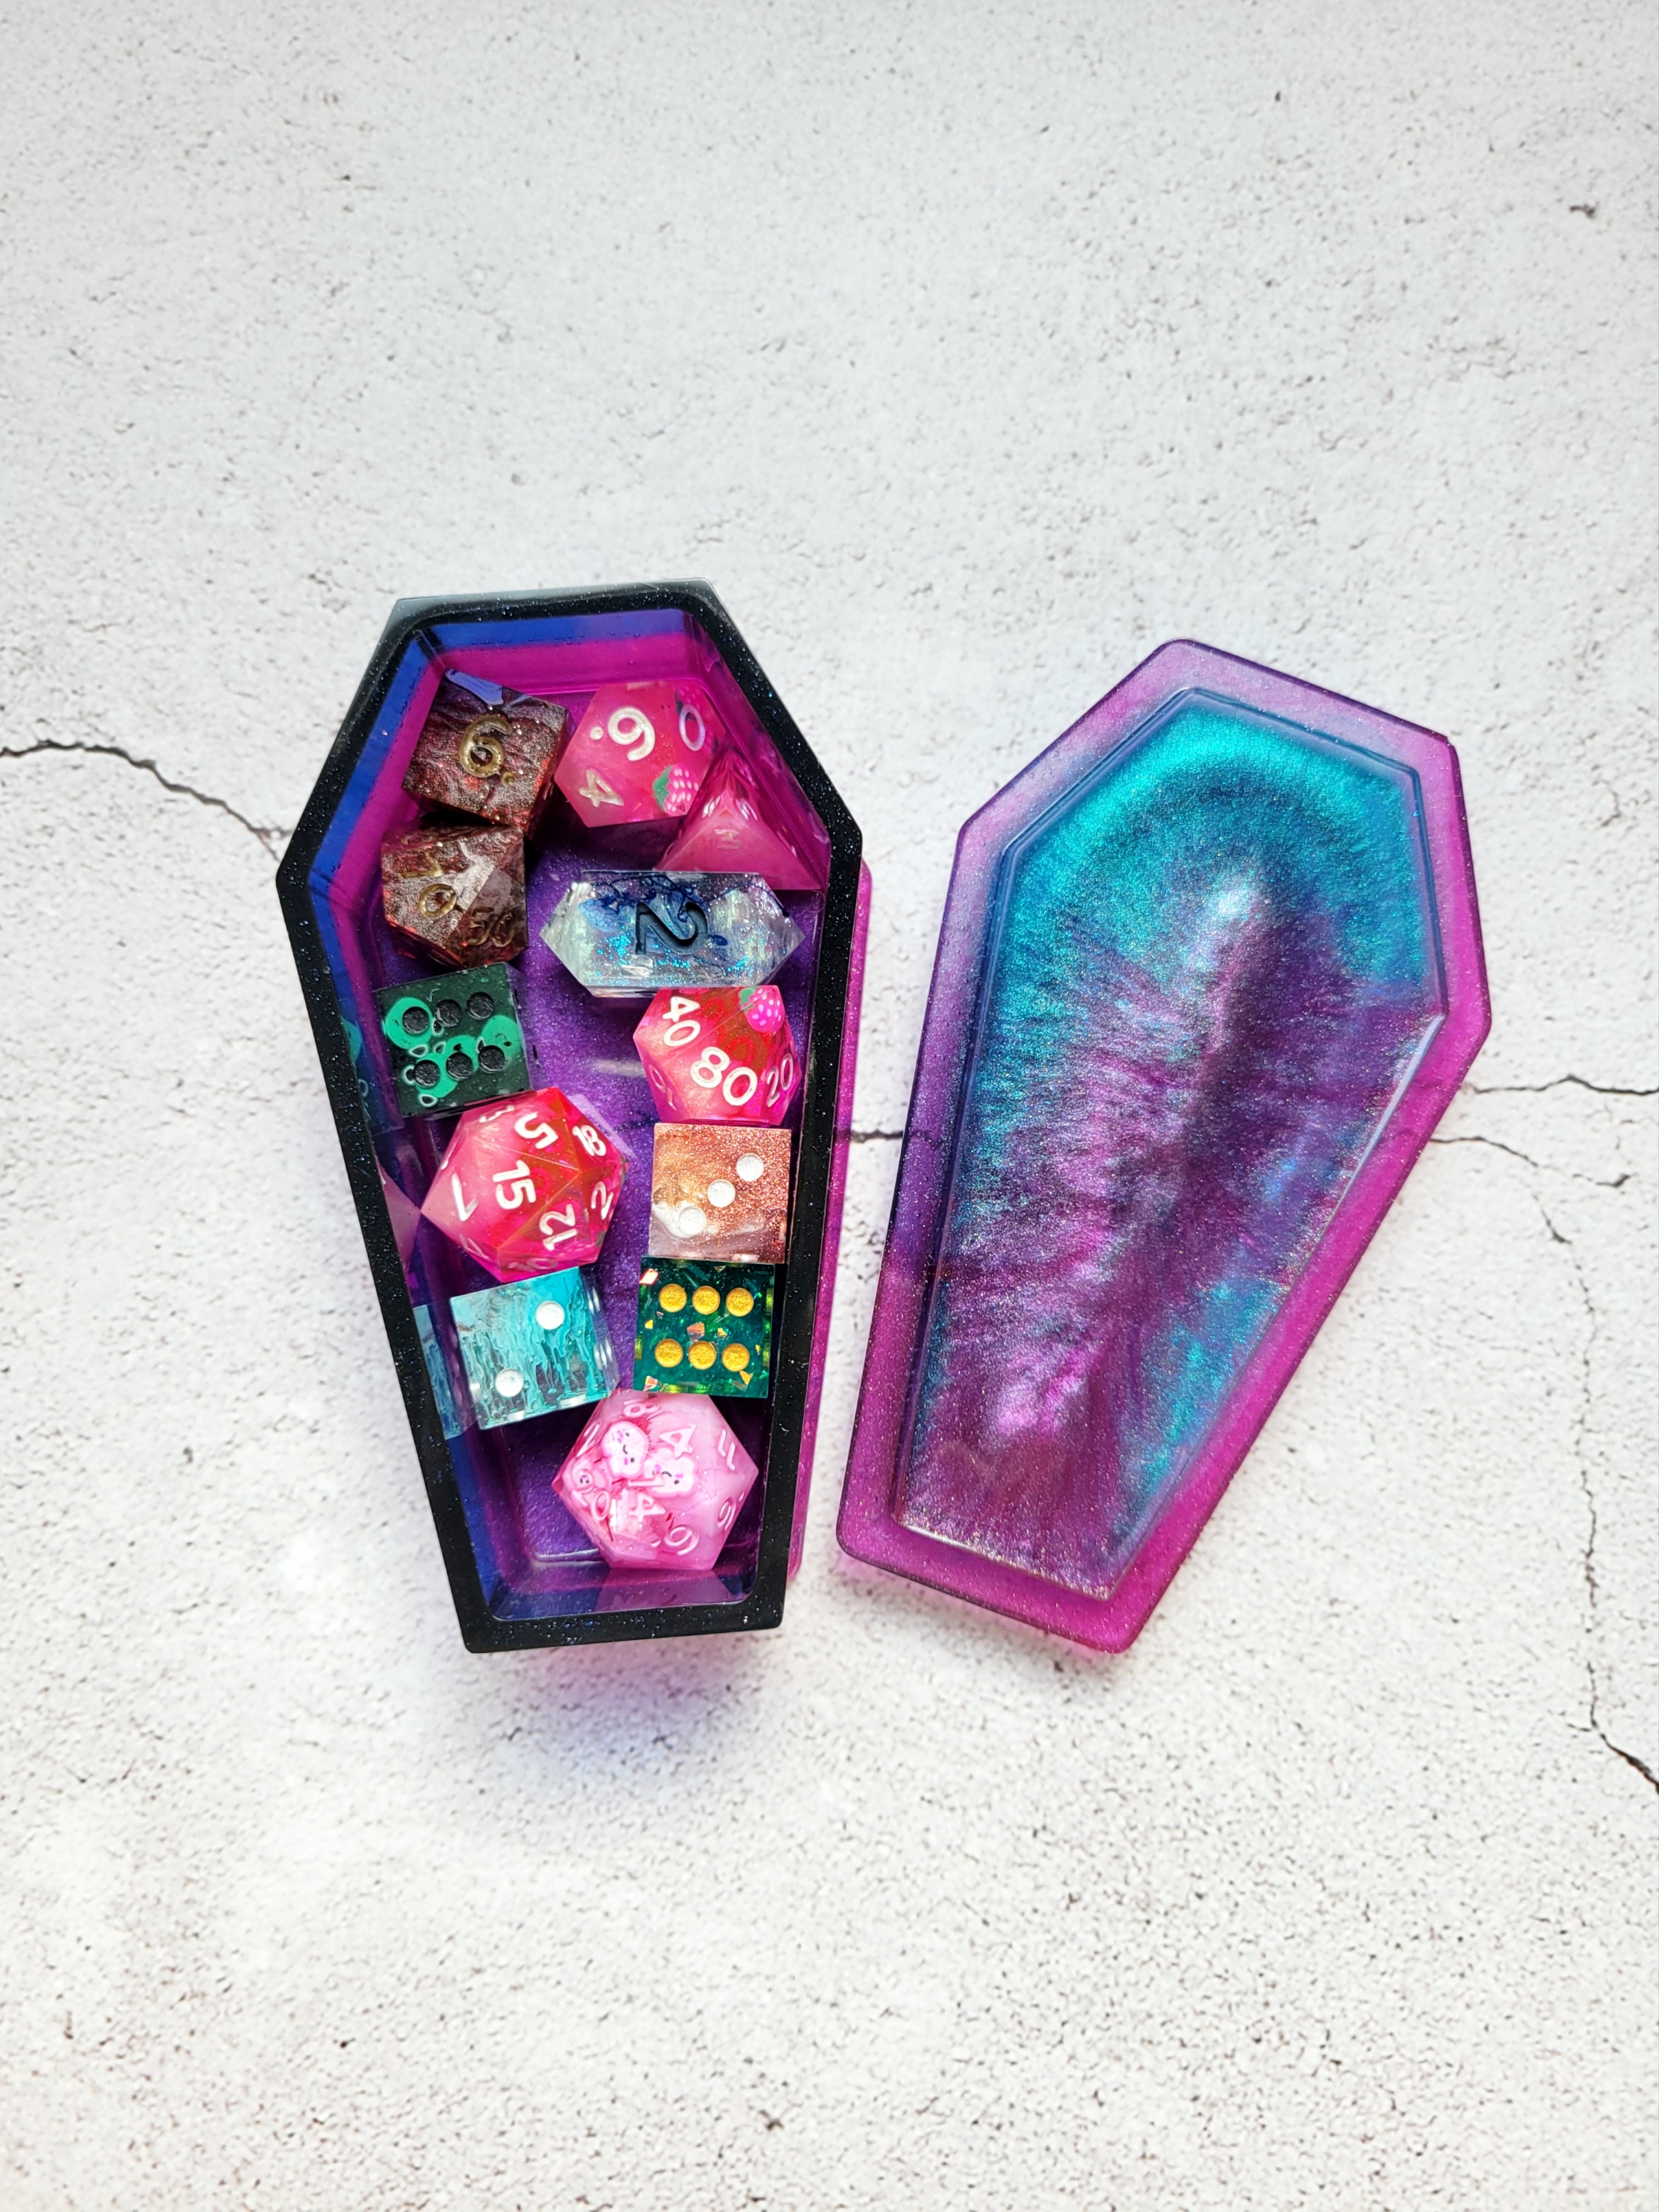 a resin made dice coffin, open lid to show the dice inside, in shimmering blues, purples, pinks, and black